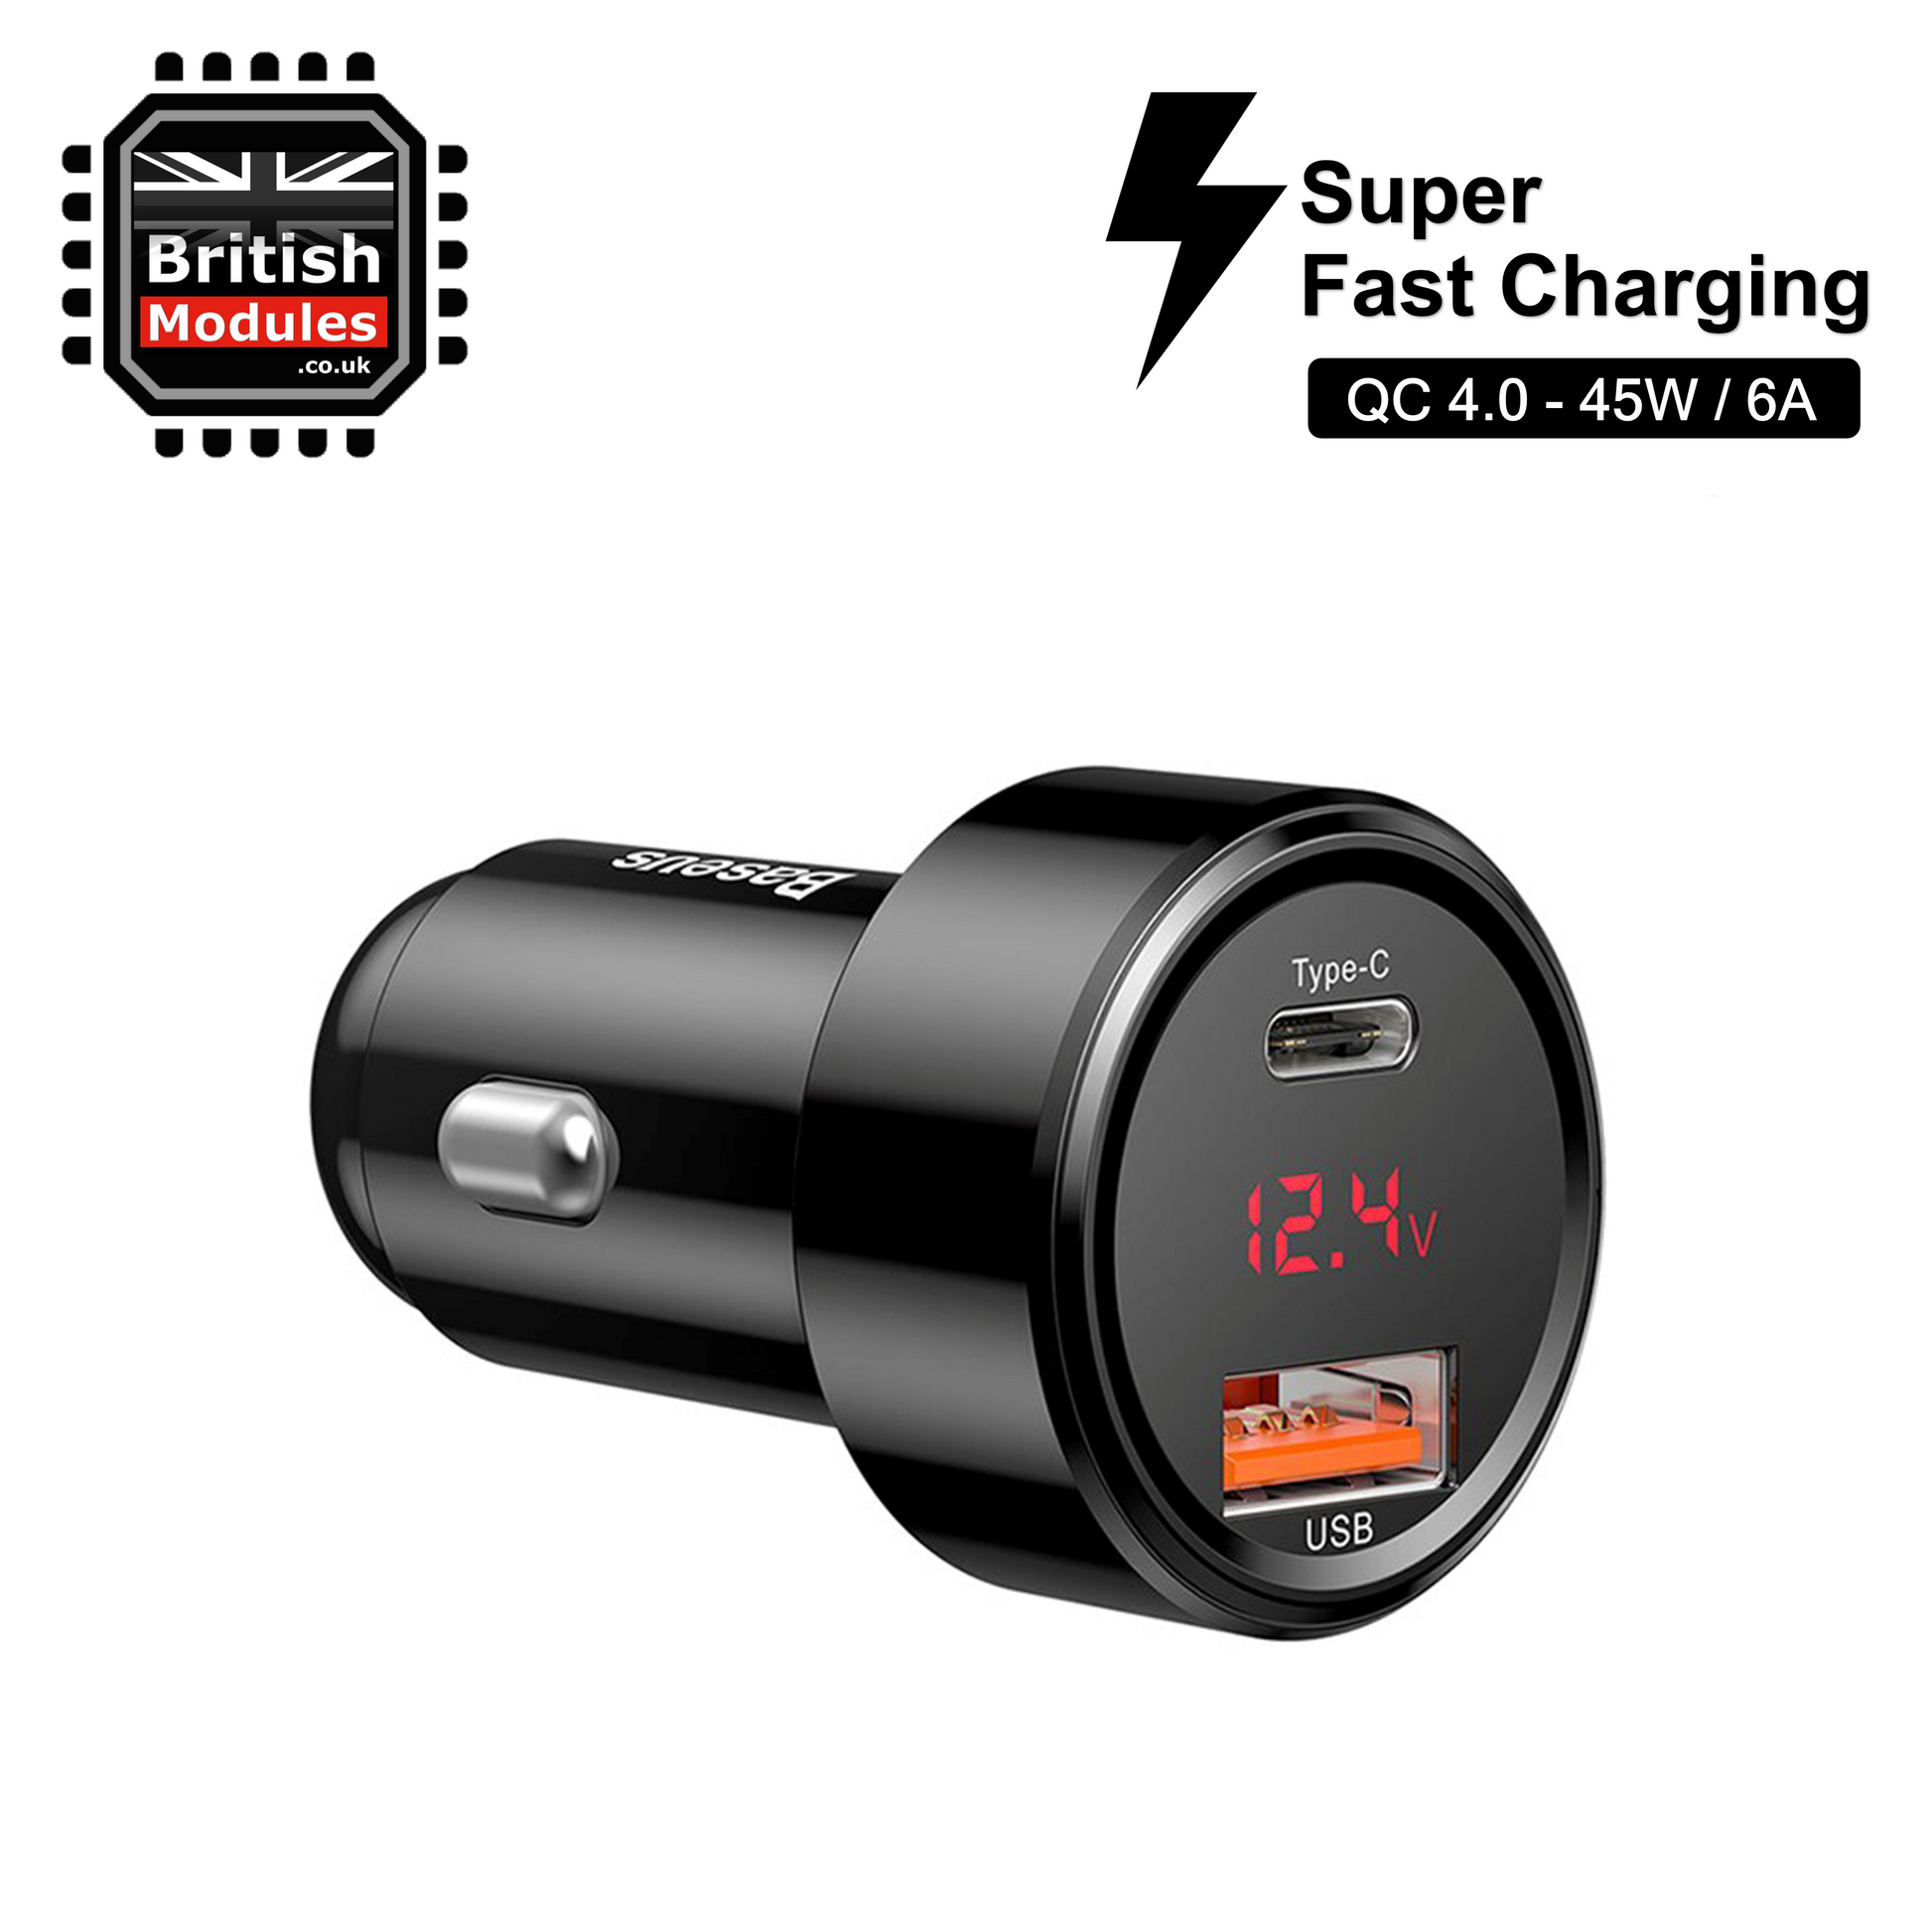 Baseus Super Fast Charging Car Charger 65W Dual Port with LED Display –  British Modules